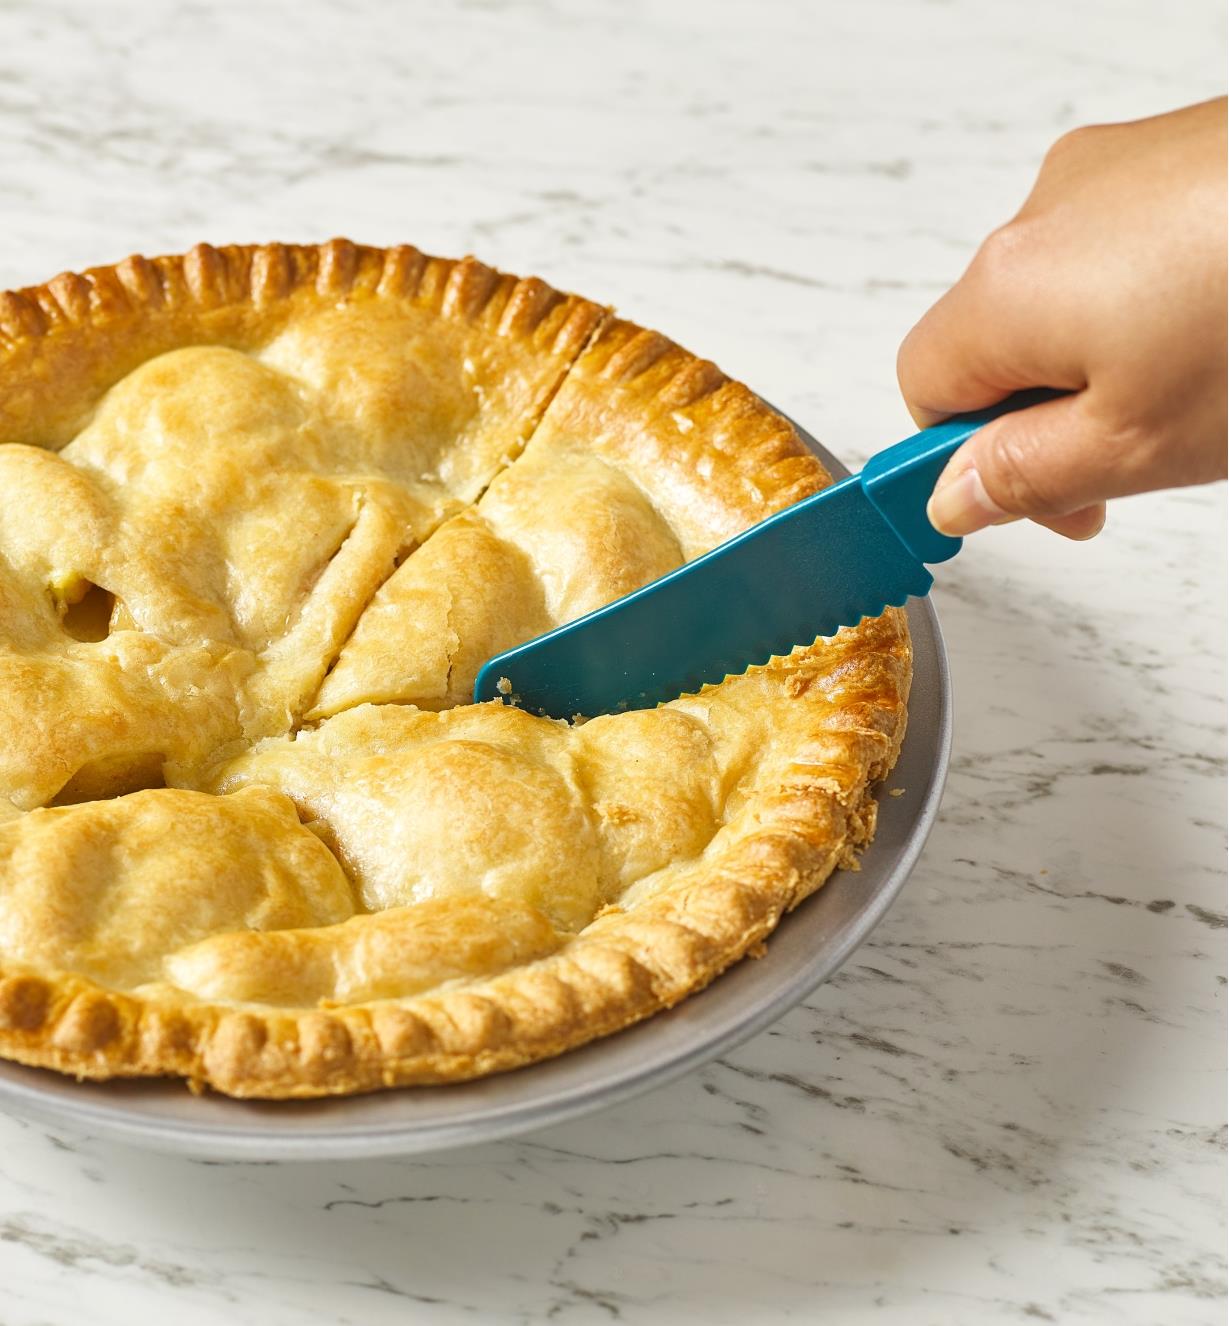 Slicing a pie in a non-stick pan using the bakeware buddy knife